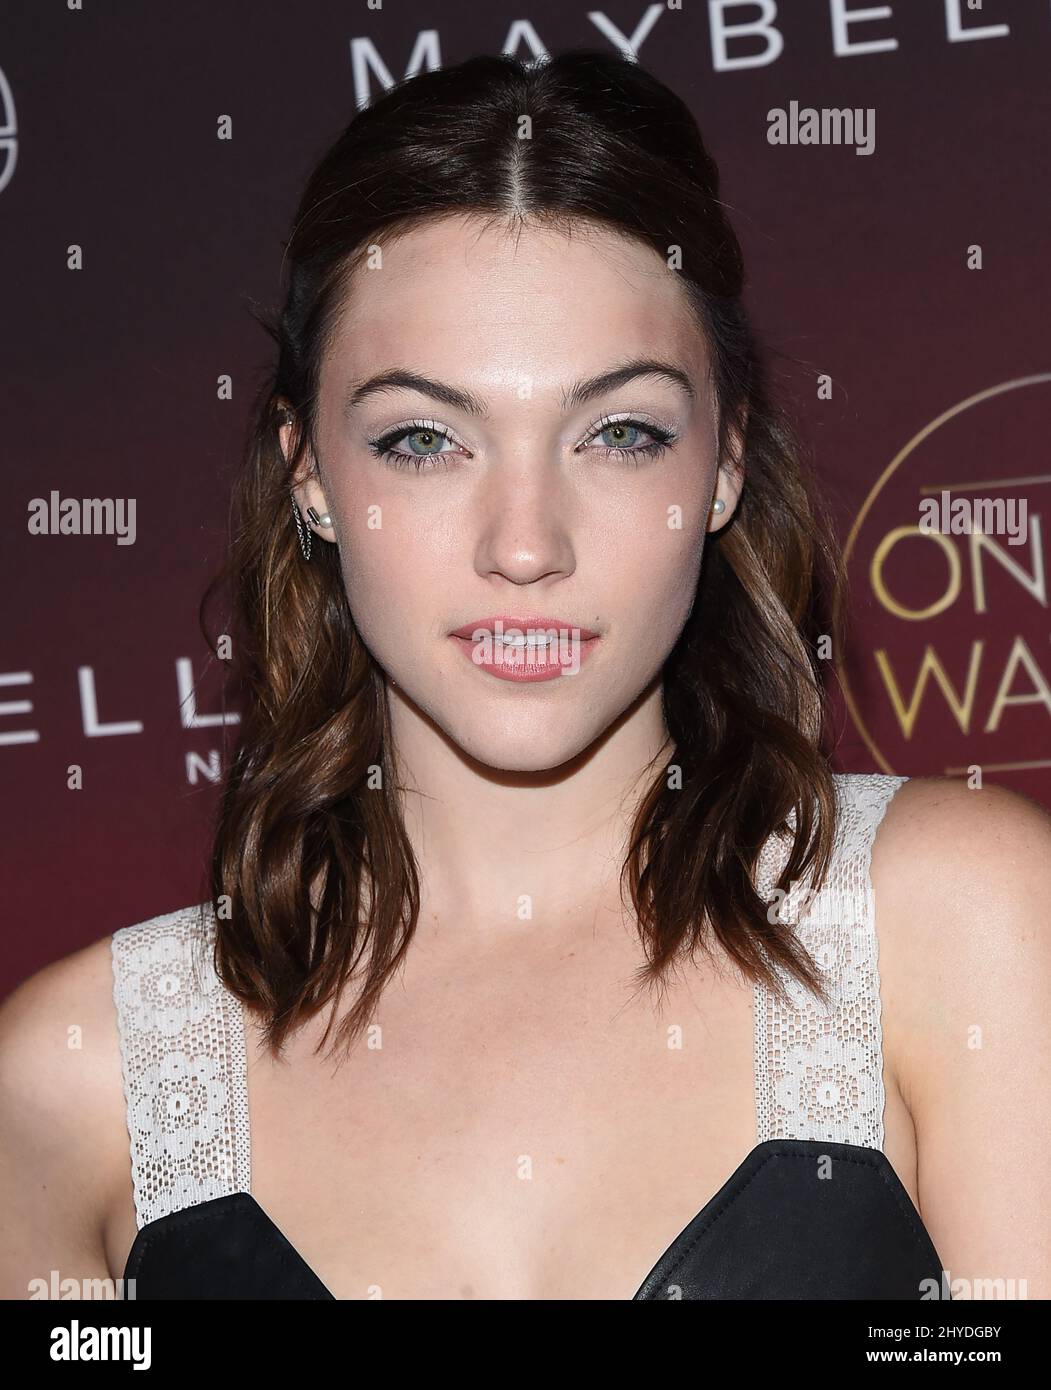 Violett Beane attends People's 'One's To Watch' Event held at the Neuehouse Stock Photo